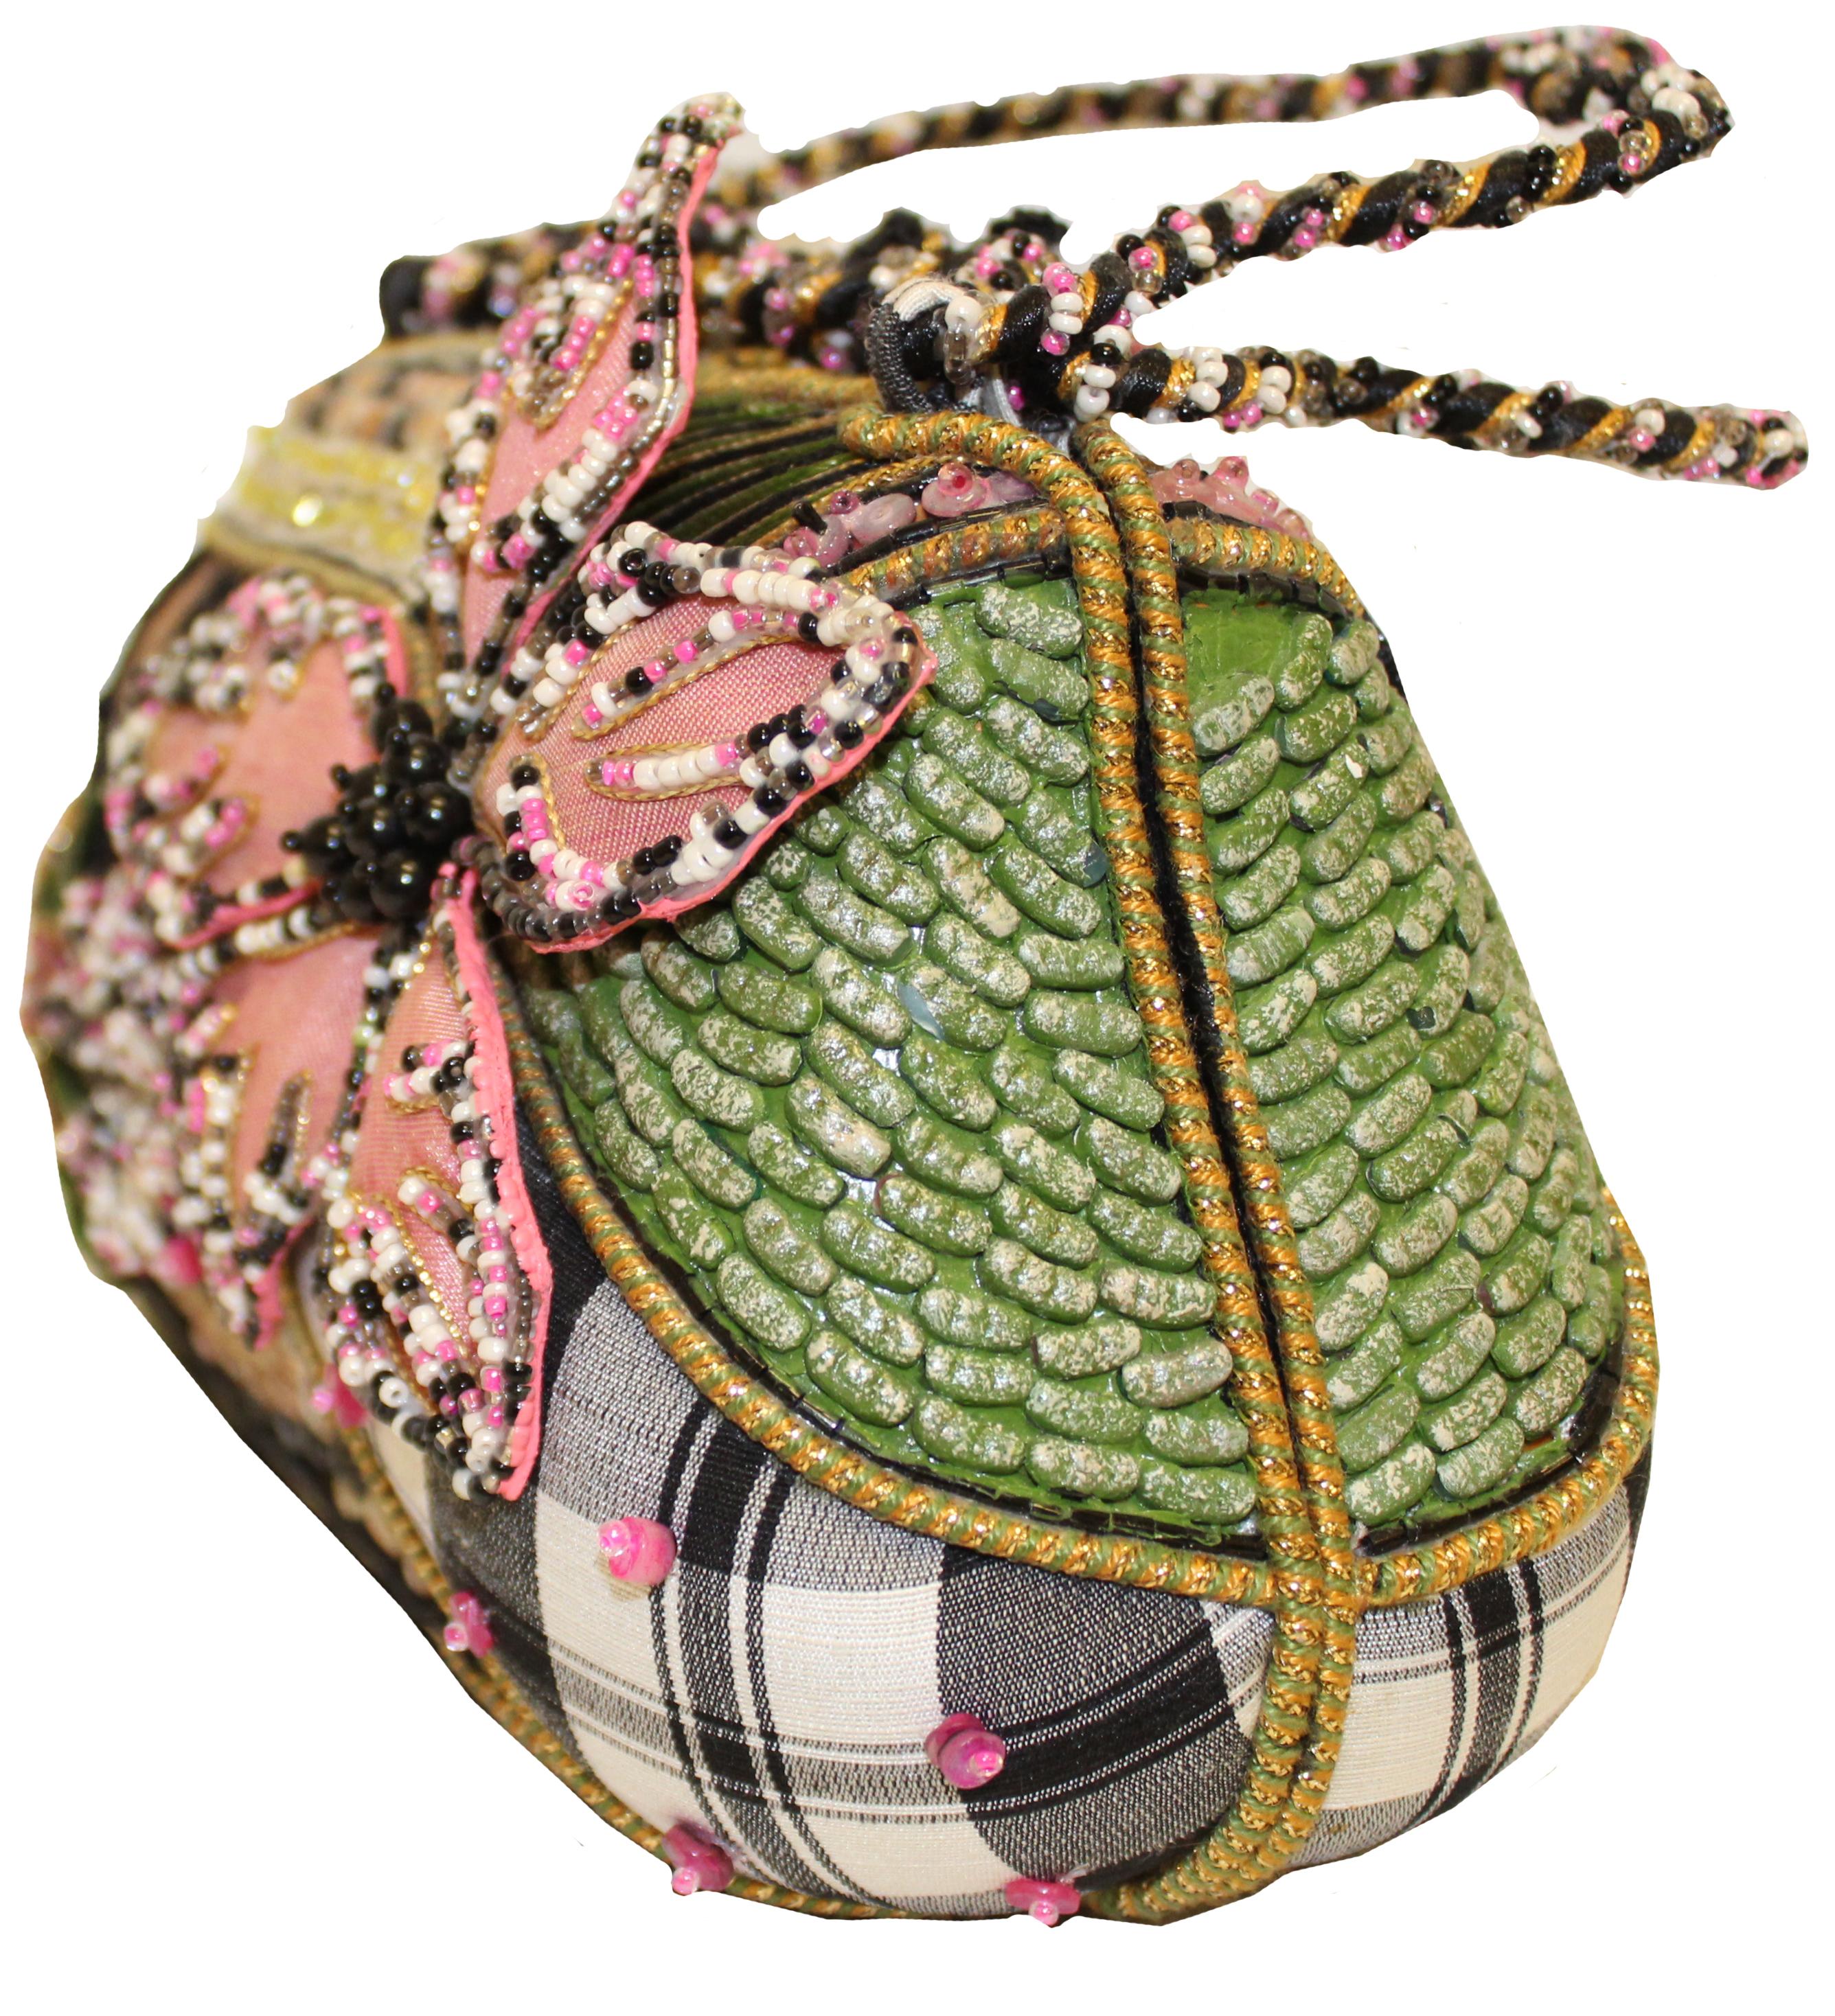 Mary Frances' handbags are instantly recognizable!  Design genius that combines femininity with function.  Whimsical yet elegant.  This structured frame handbag begins with black and white checked canvas and is richly embellished!  Multi color beads